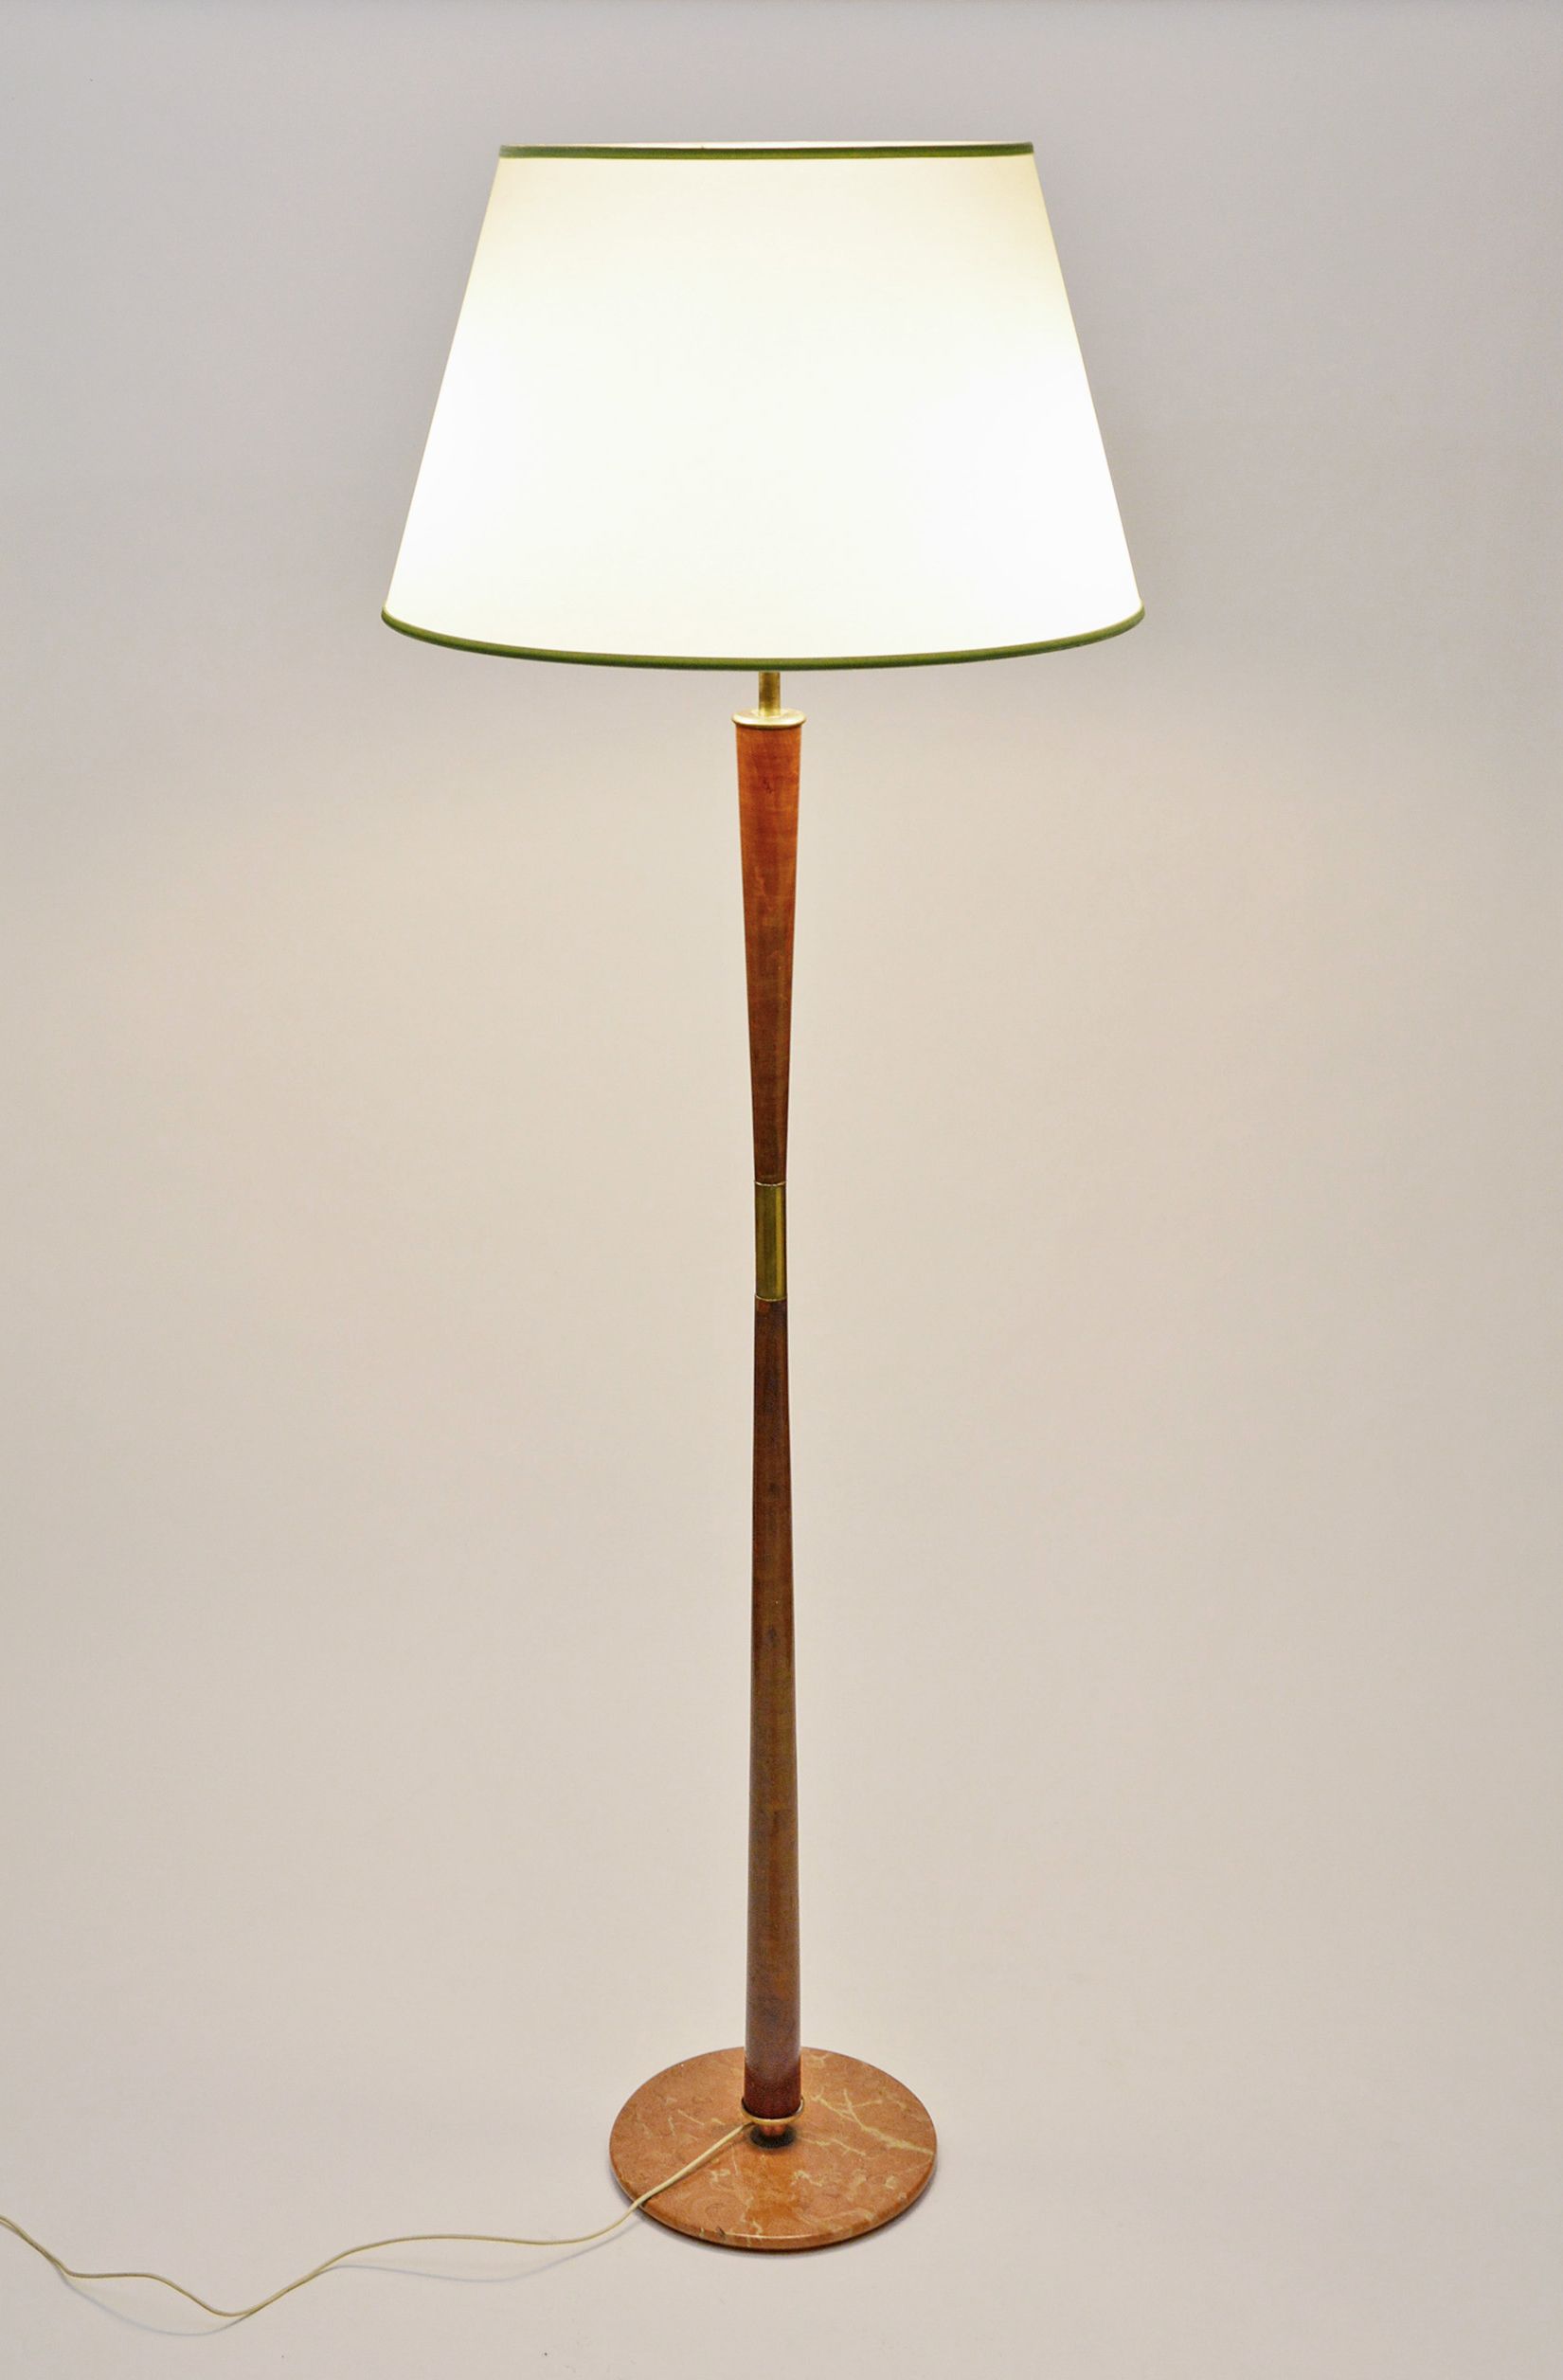 Marble Base Floor Lamps With Regard To Trendy Wood And Brass Floor Lamp With Marble Basestilnovo, 1940s (View 5 of 15)